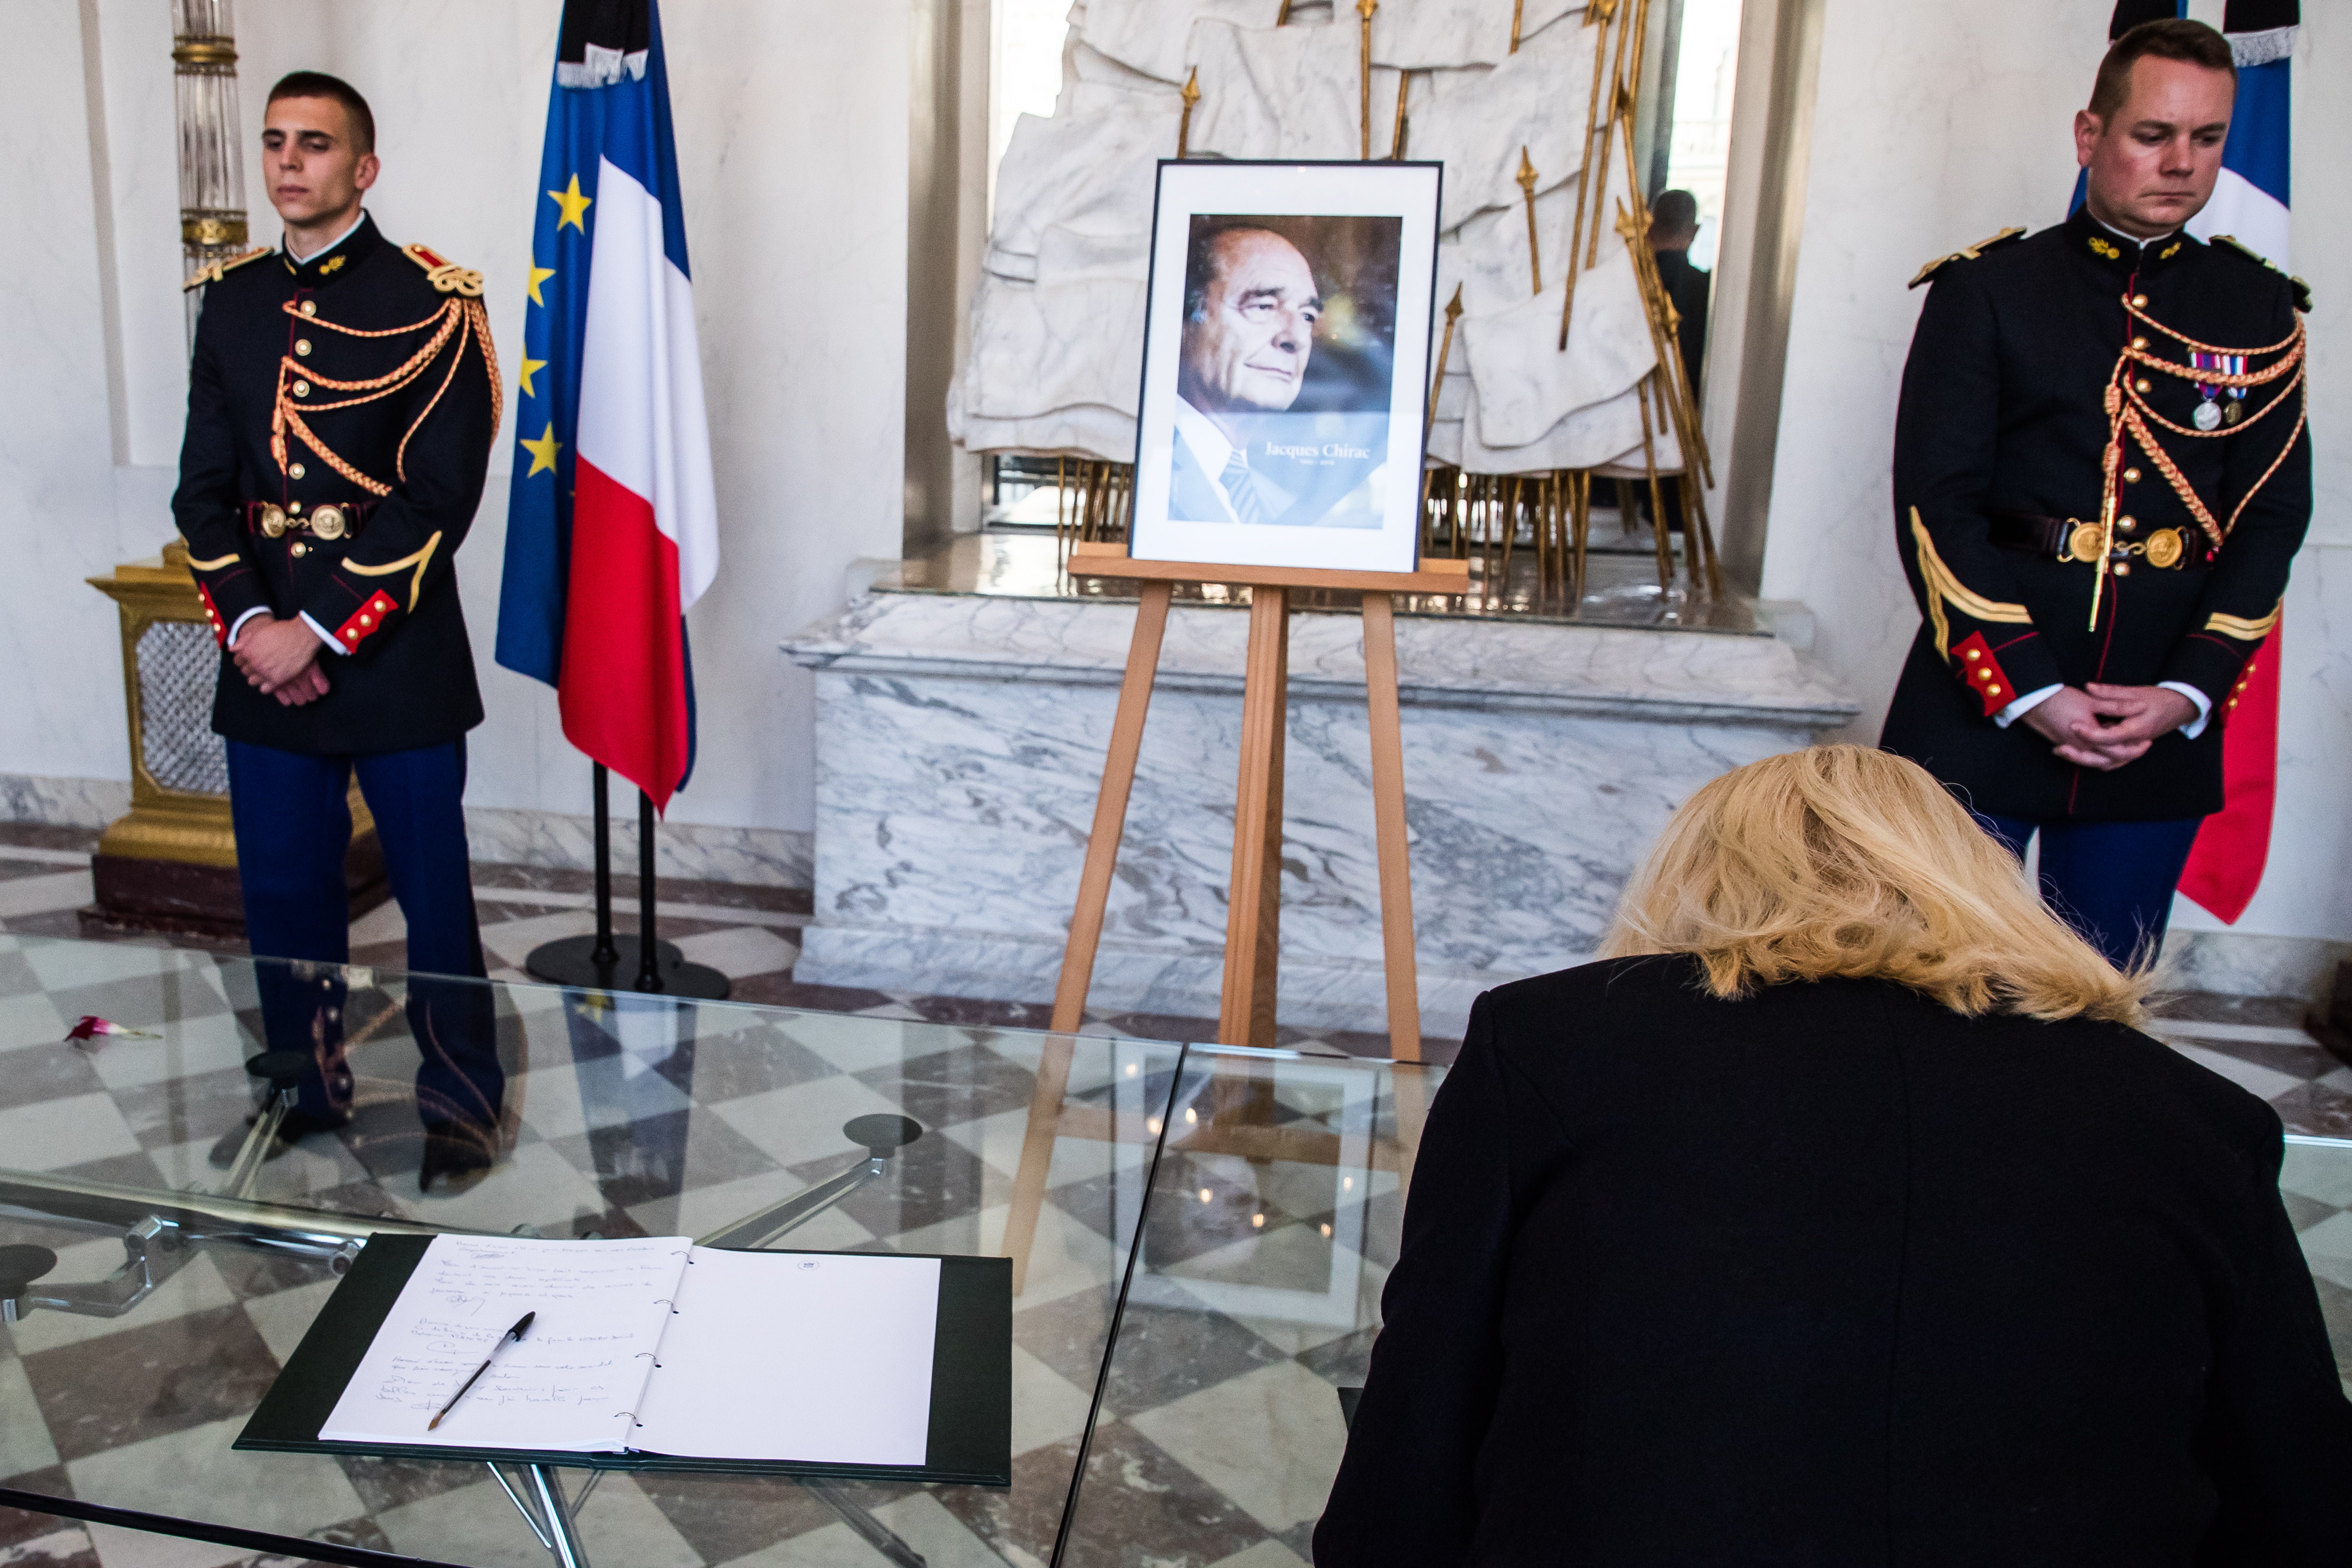 epa07877446 French honor guards stand next to a Jacques Chirac's portrait as people sign condolence registers at the Elysee Presidential Palace, following the death of former French President Jacques Chirac in Paris, France, 28 September 2019. Chirac died peacefully on 26 September 2019 surrounded by his family, aged 86. The former French president Jacques Chirac's health was troubled ever since a 2005 stroke he suffered while still in office. He was head of state from 1995 to 2007, was twice president, twice prime minister and 18 years mayor of Paris.  EPA/CHRISTOPHE PETIT TESSON